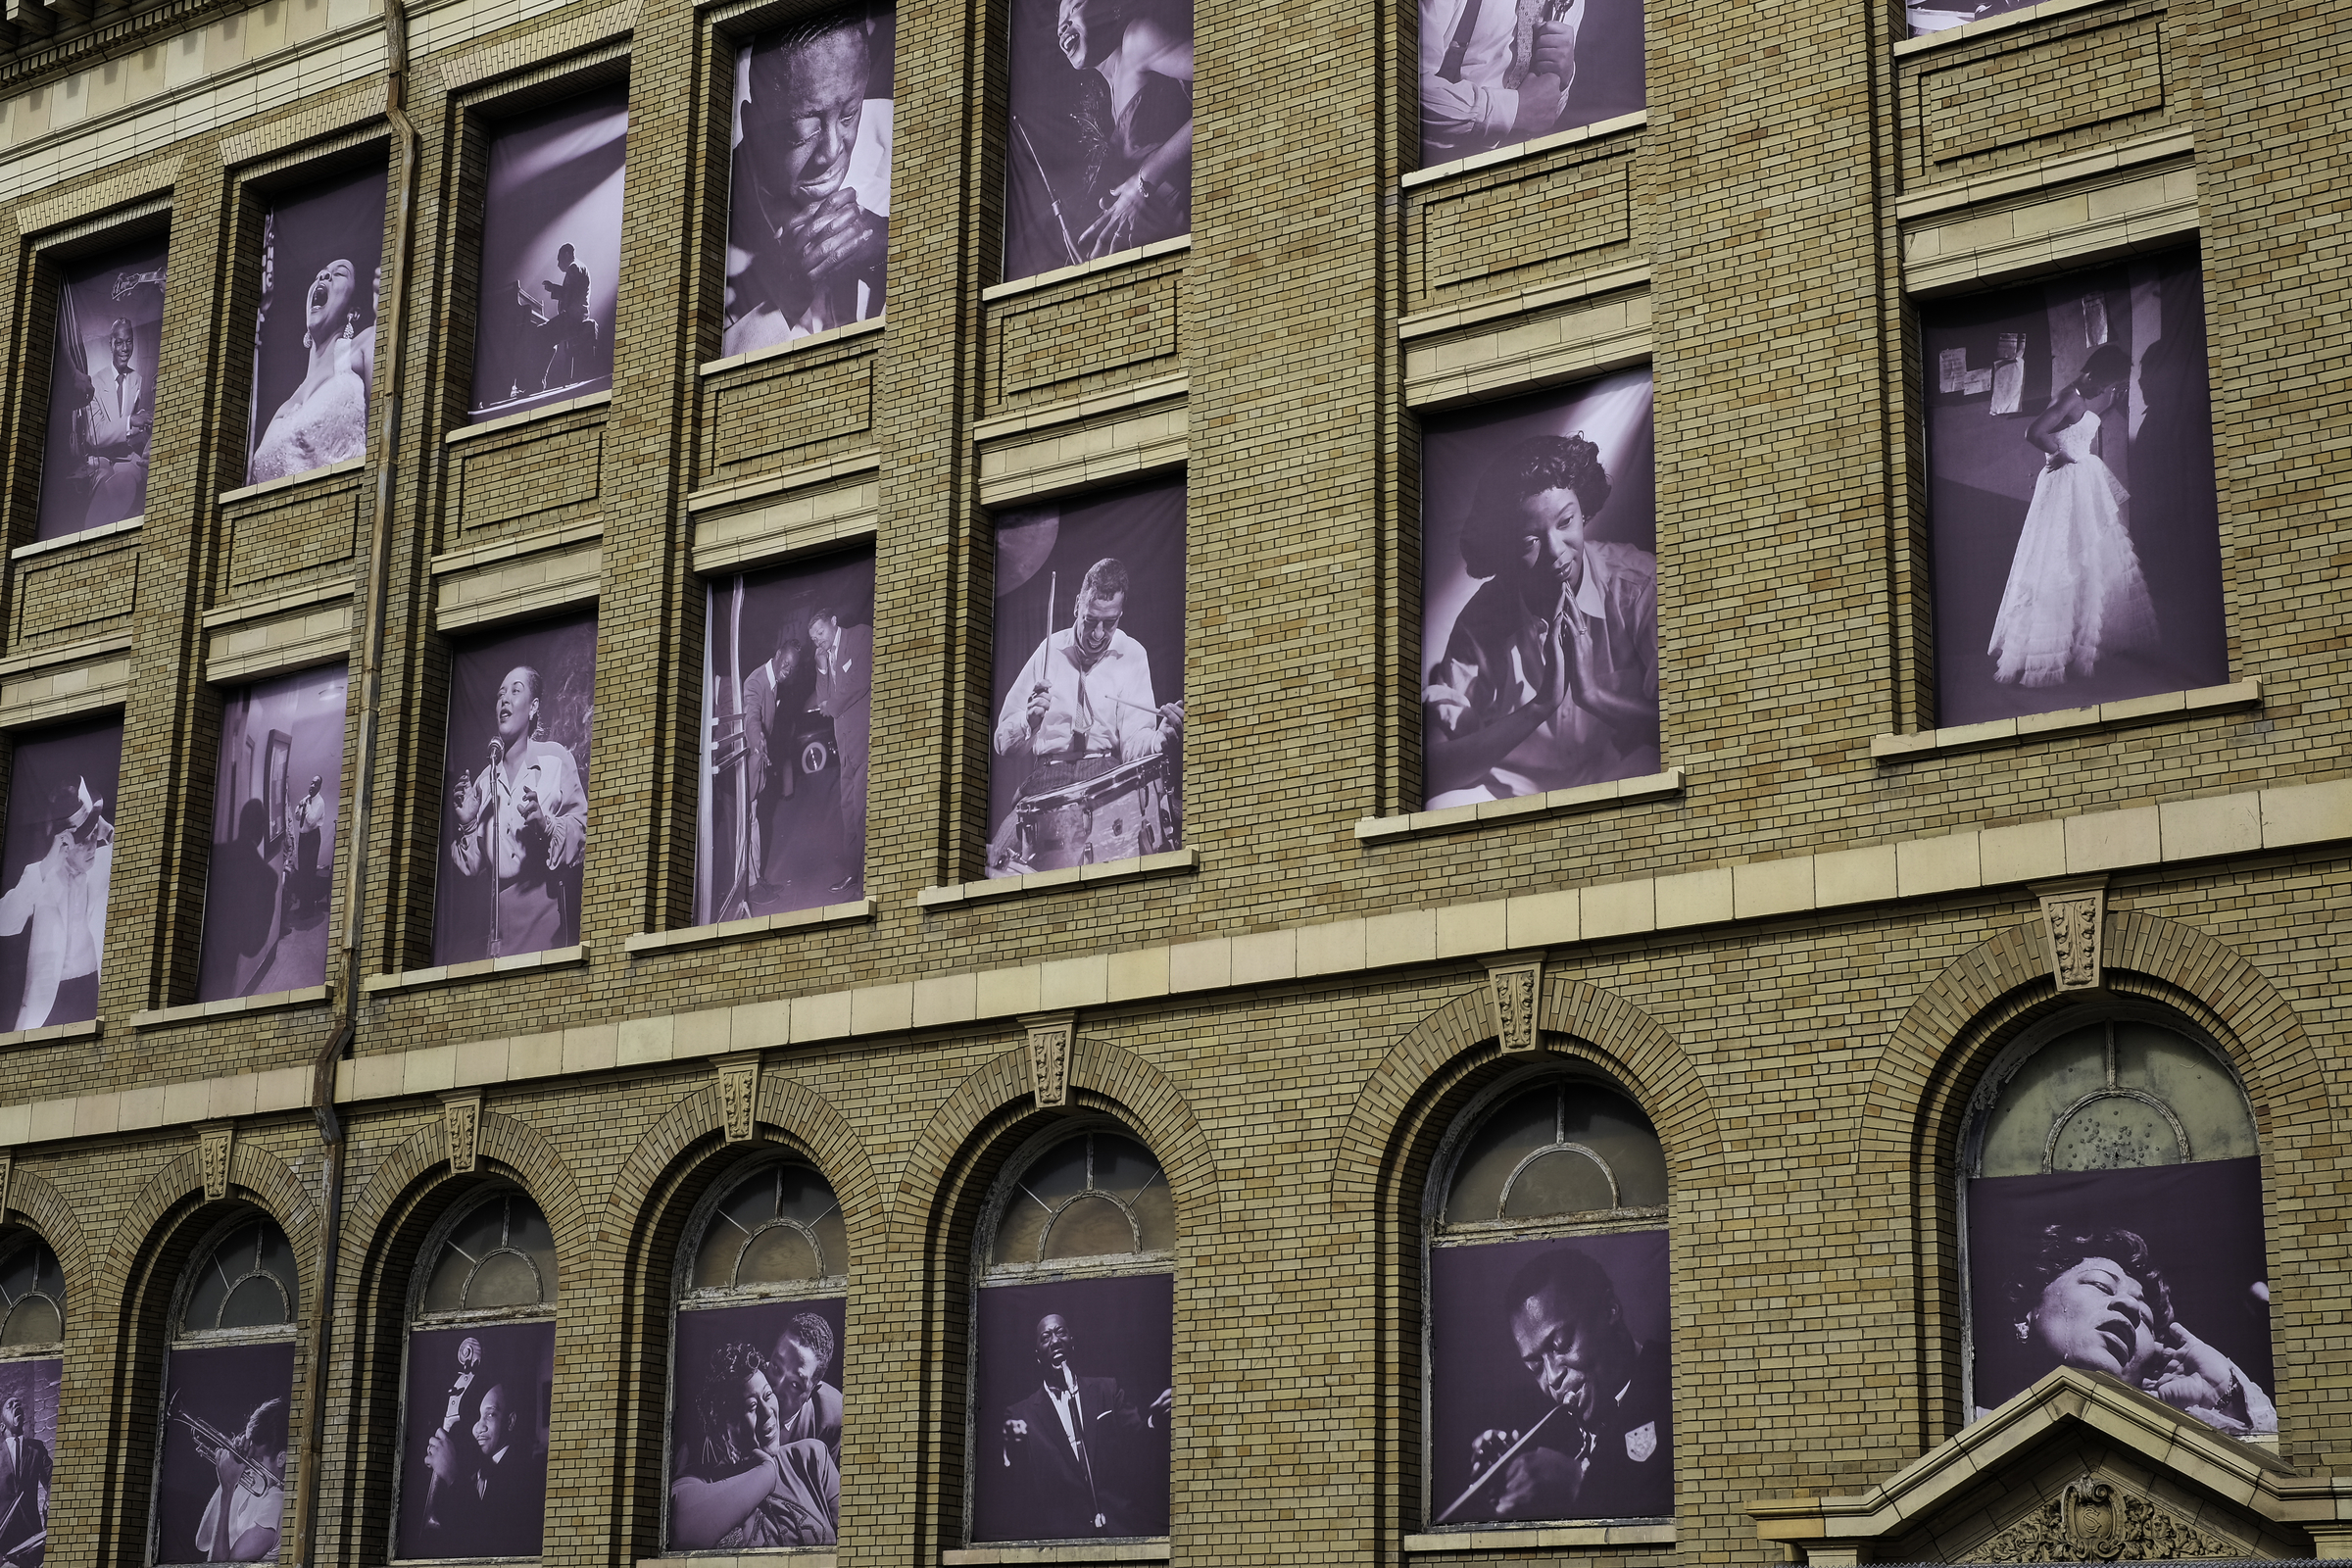 Photos of jazz icons in the windows of the former San Francisco Unified School District building across the street from the SFJAZZ Center